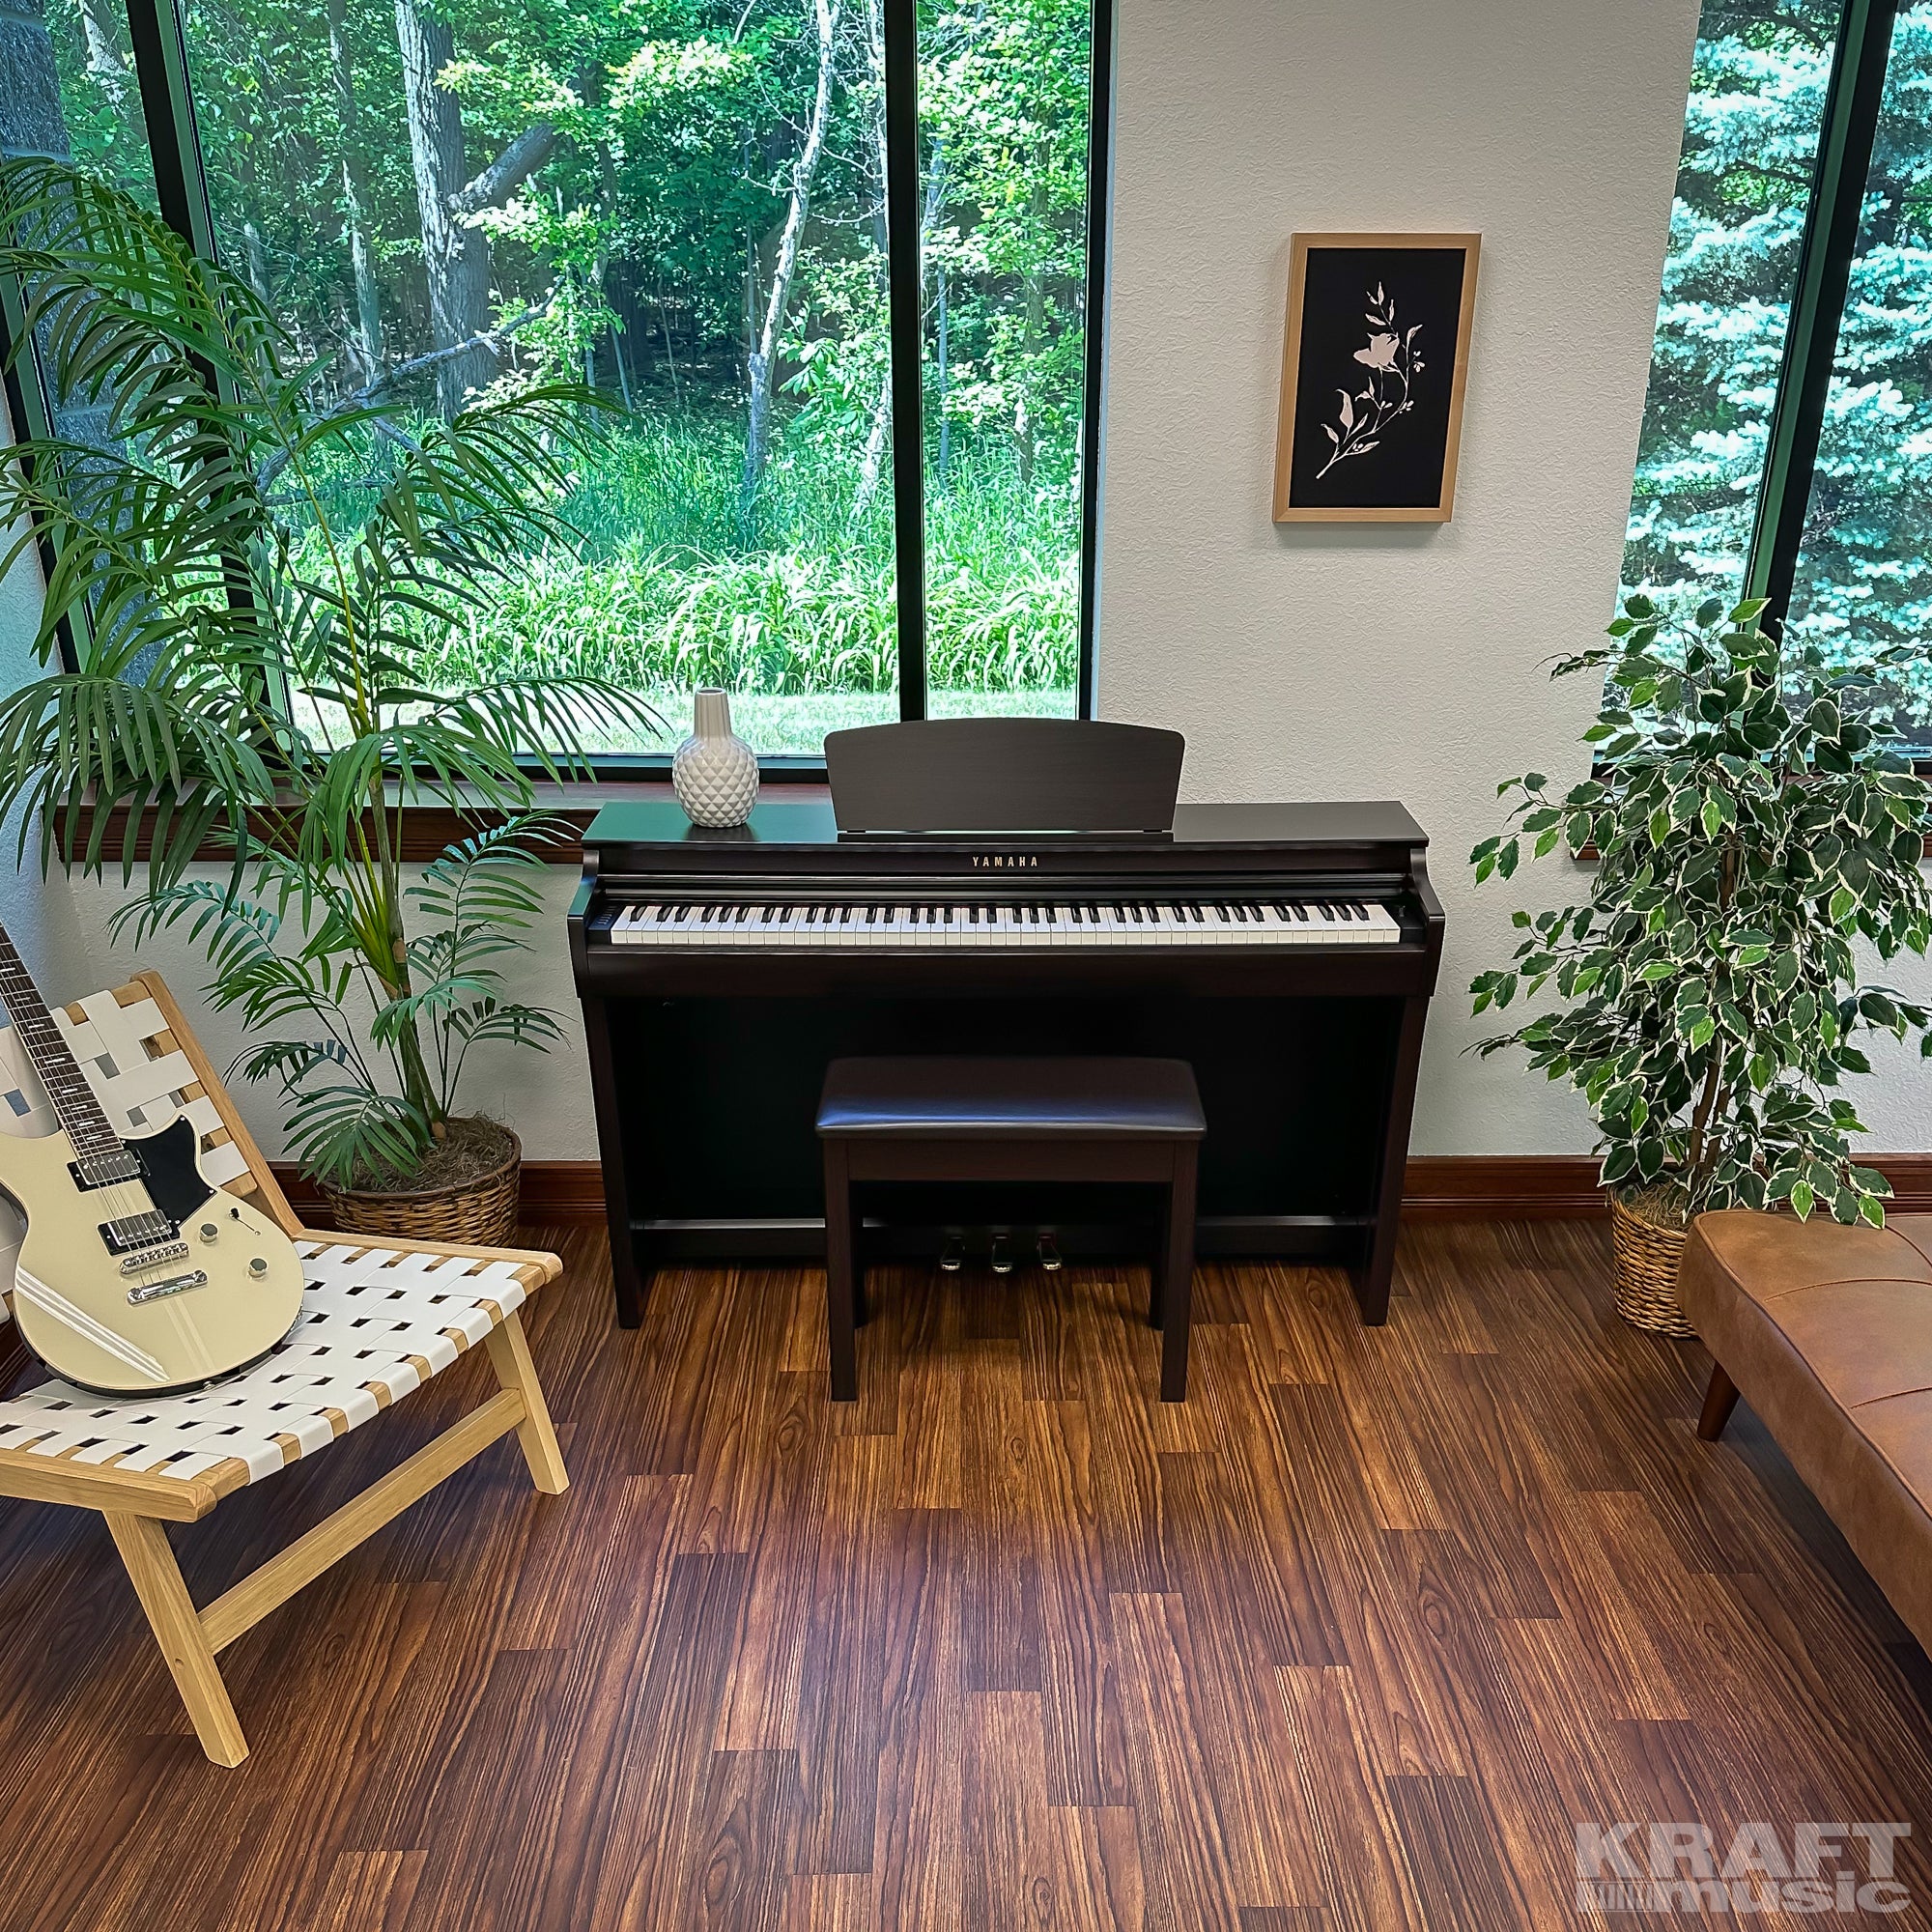 Yamaha Clavinova CLP-725 Digital Piano - Rosewood - front view from above in a stylish room